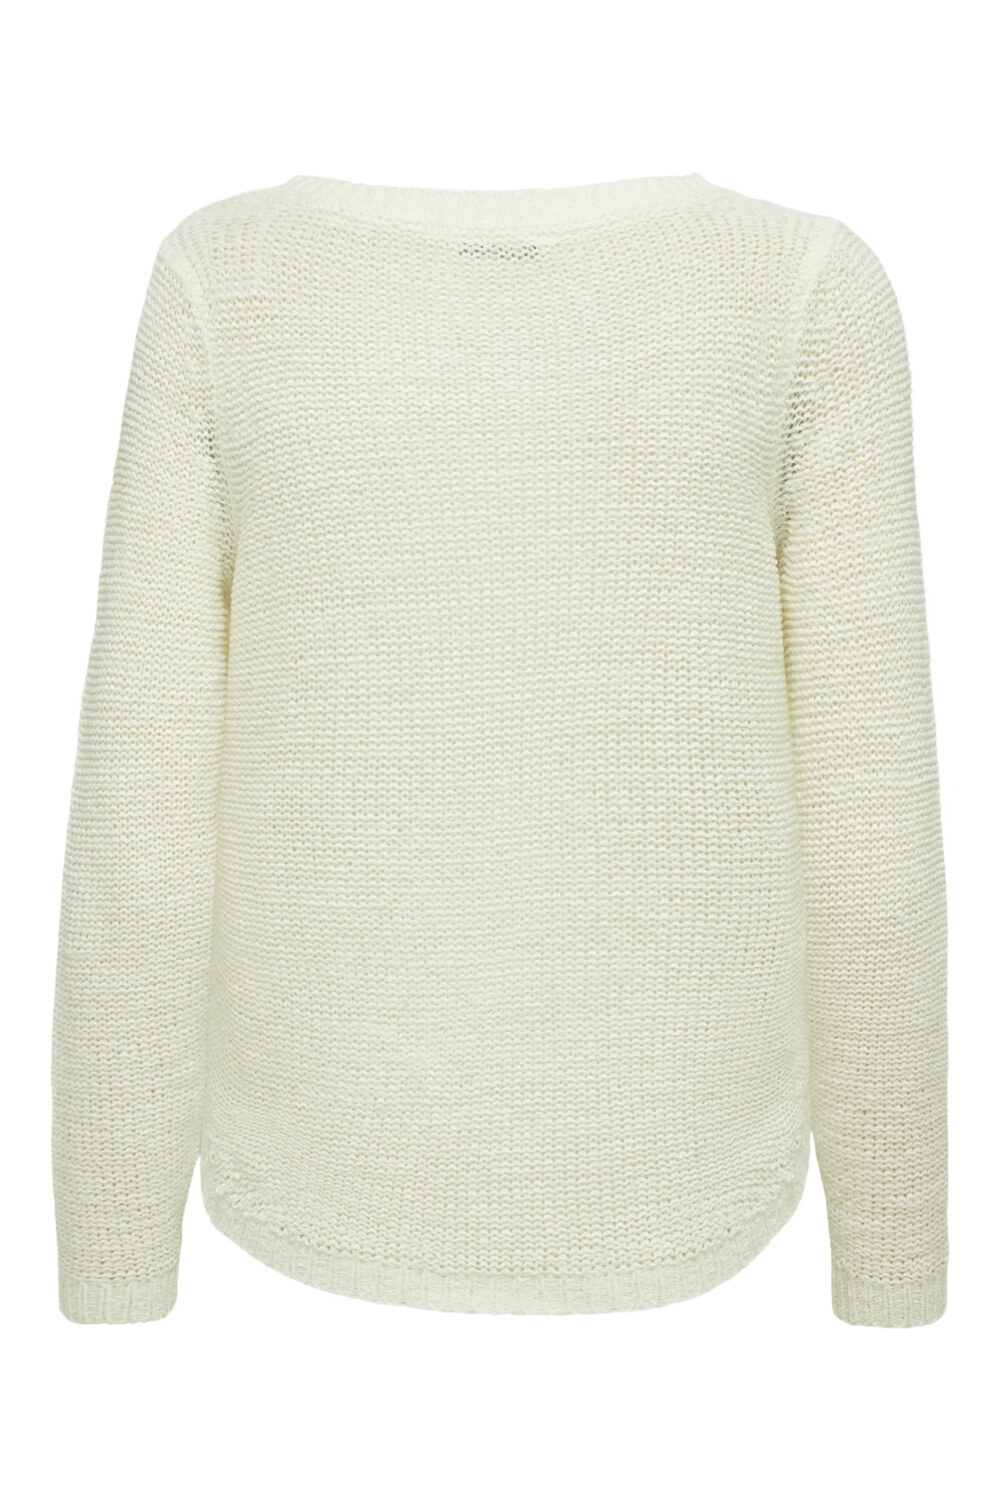 Maglione Only ONLGEENA XO L/S KNT NOOS Bianco - Foto 5